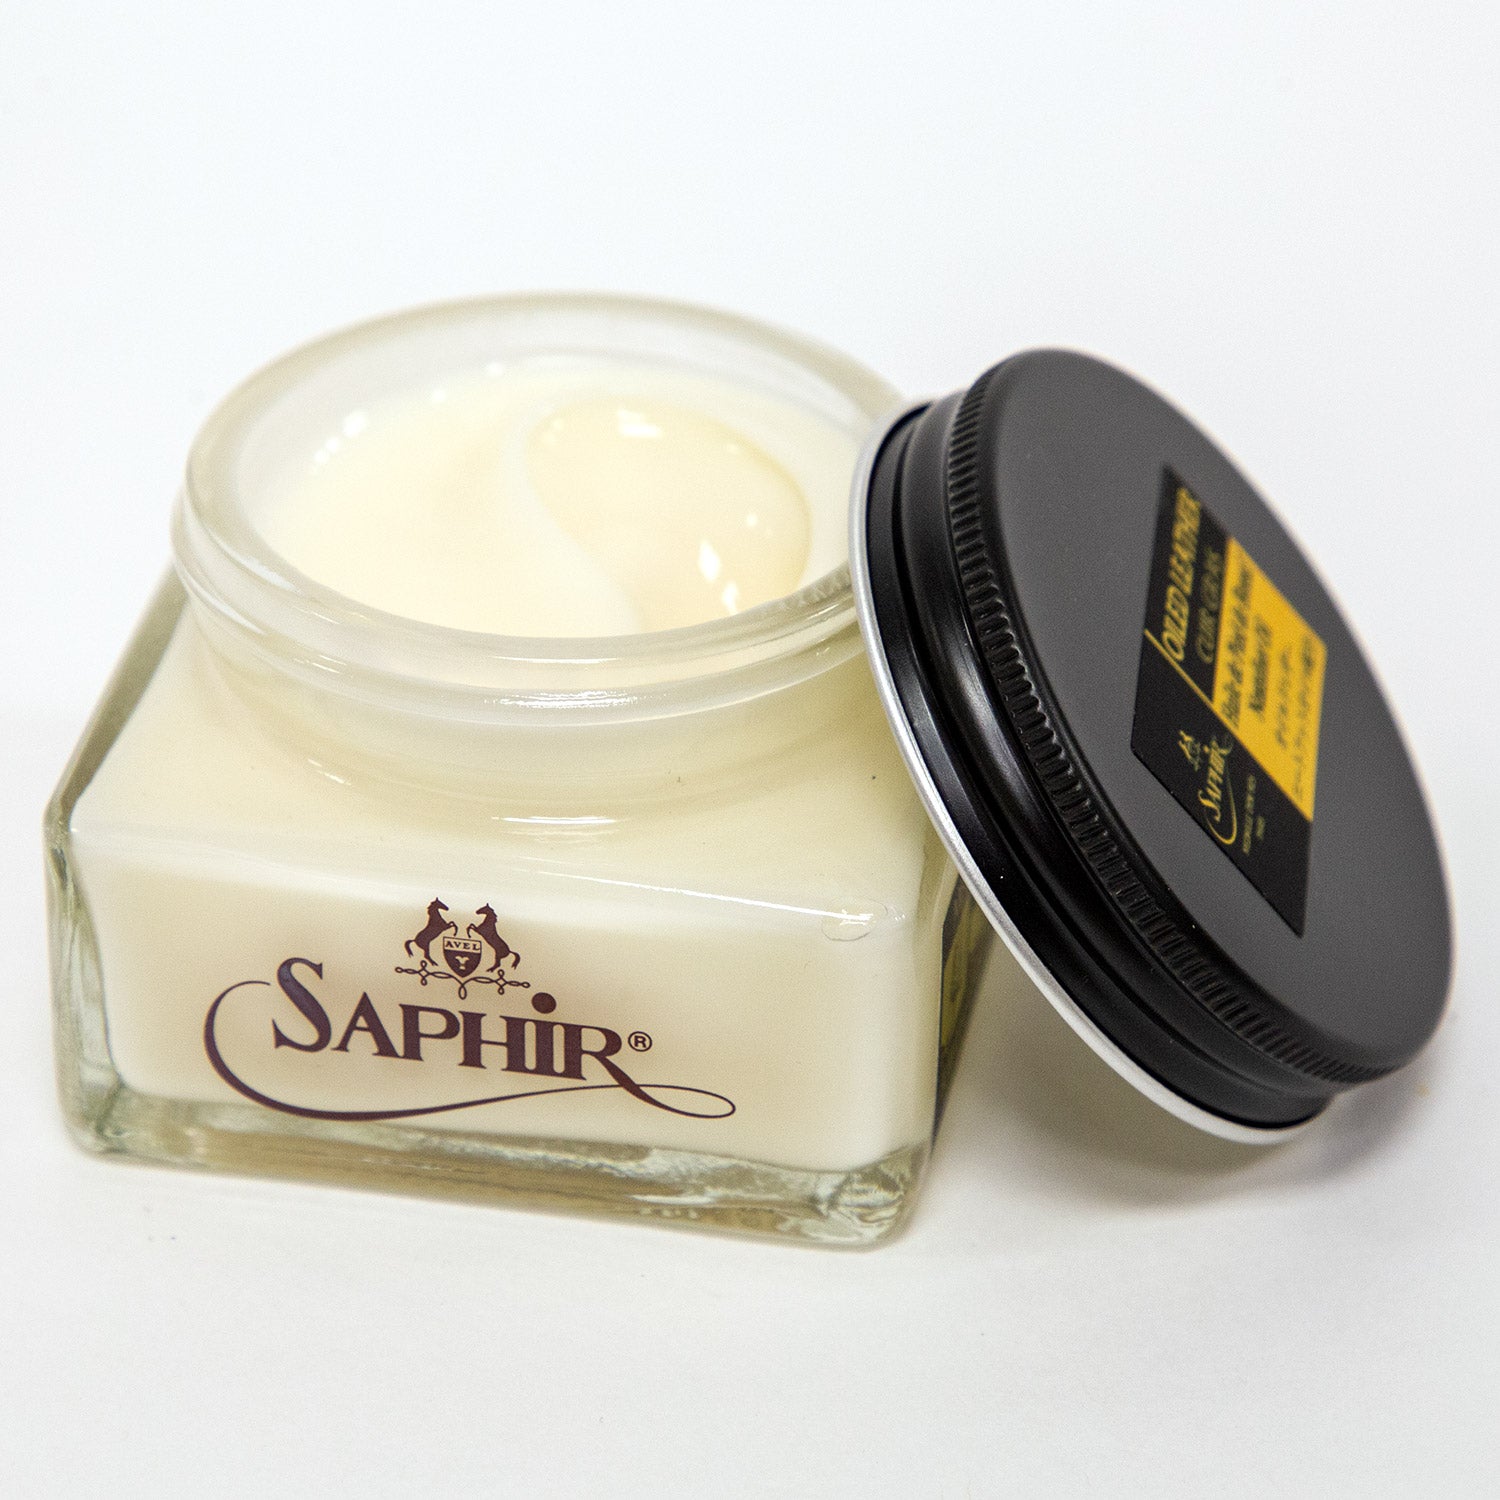 A jar of Saphir Medaille d'Or Oiled Leather Cream for Chromexcel is beautifully displayed on a white surface by KirbyAllison.com.